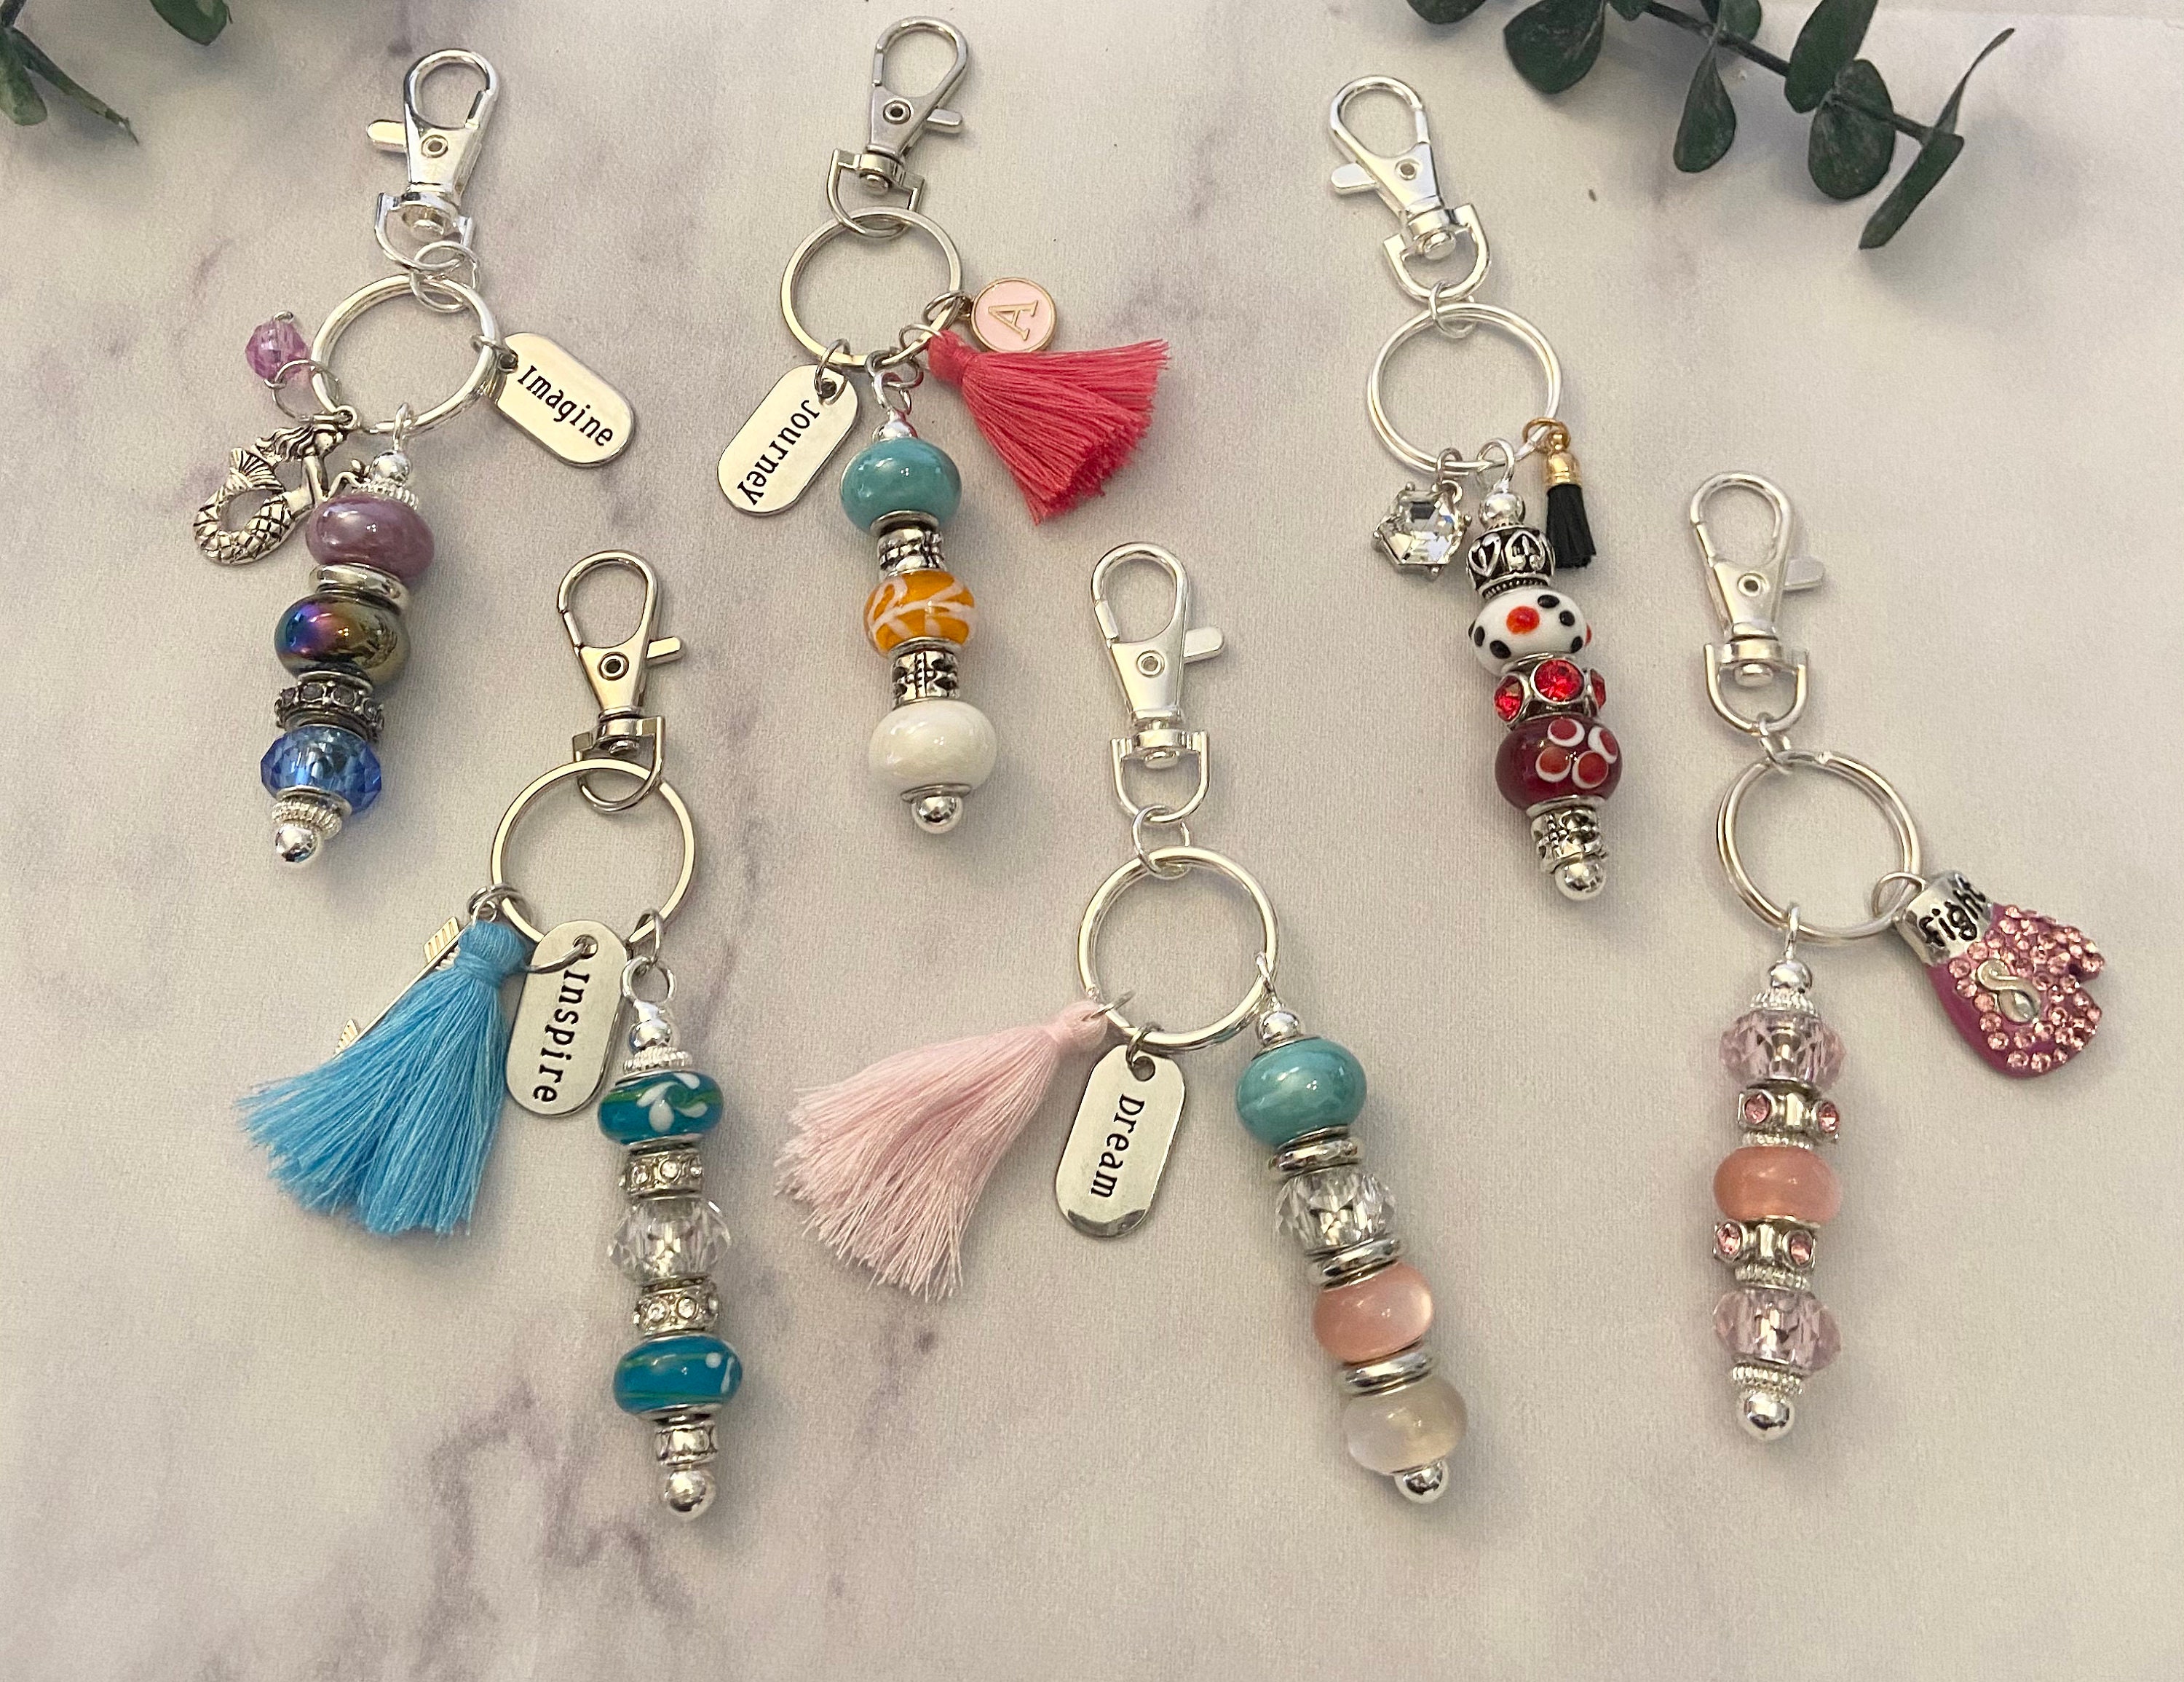 1111 Inspirational Keychain With Crystal Bead and Charm / Motivational / Inspirational  / Keychain Charm / Beaded Keychain / Angel Number 